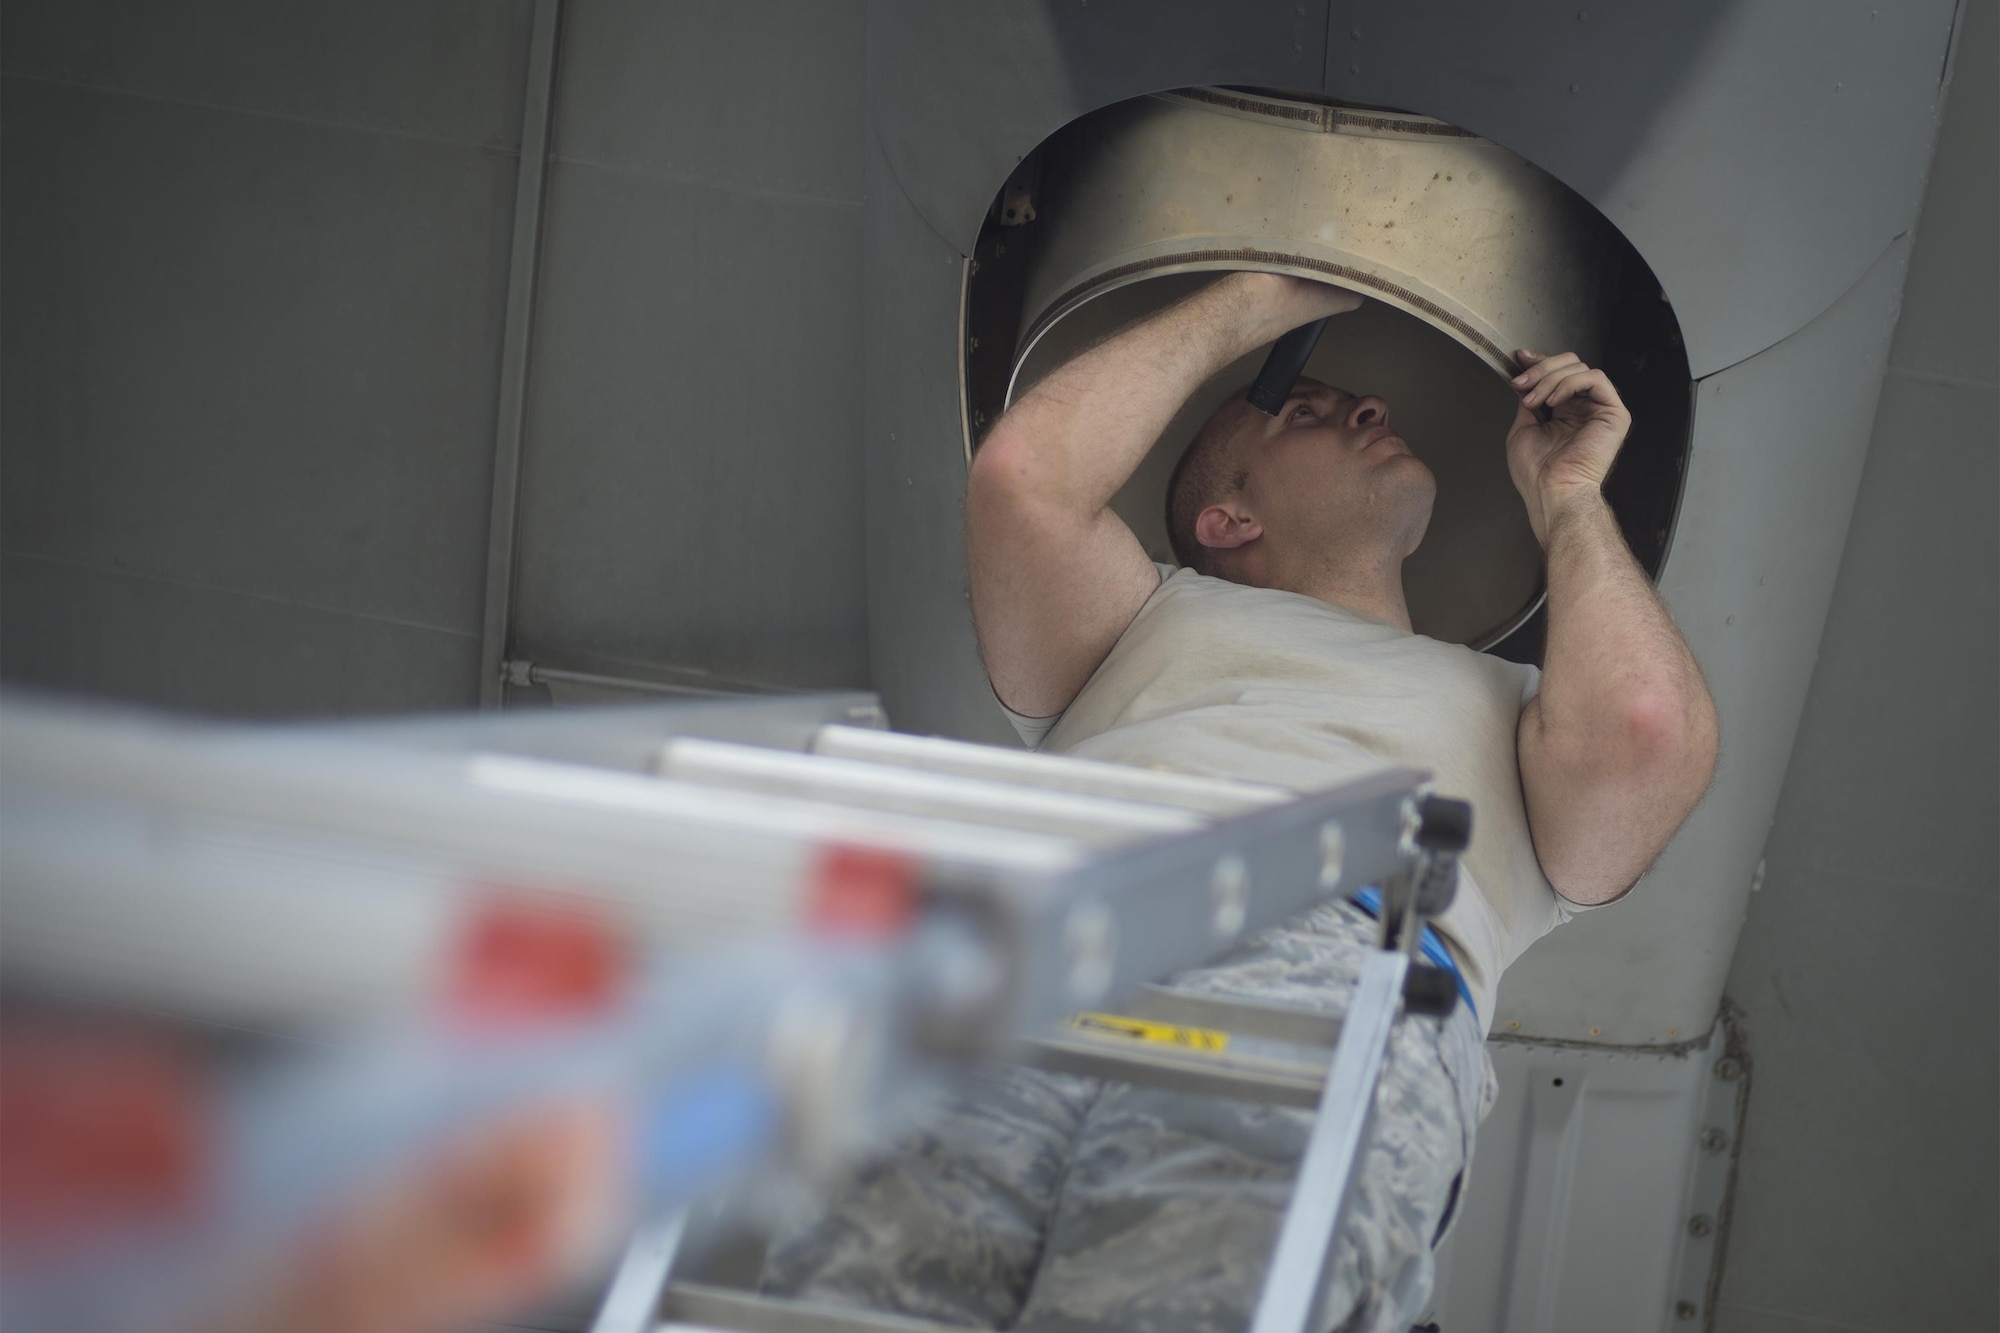 U.S. Air Force Senior Airman Ernesto Cruz, 23d Equipment Maintenance Squadron aerospace propulsion journeyman, checks exhaust ports on an HC-130J Combat King II during an isochronal inspection, May 31, 2016, at Moody Air Force Base, Ga. The HC-130J is a personnel recovery and combat search and rescue aircraft. (U.S. Air Force photo by Airman Daniel Snider/Released)